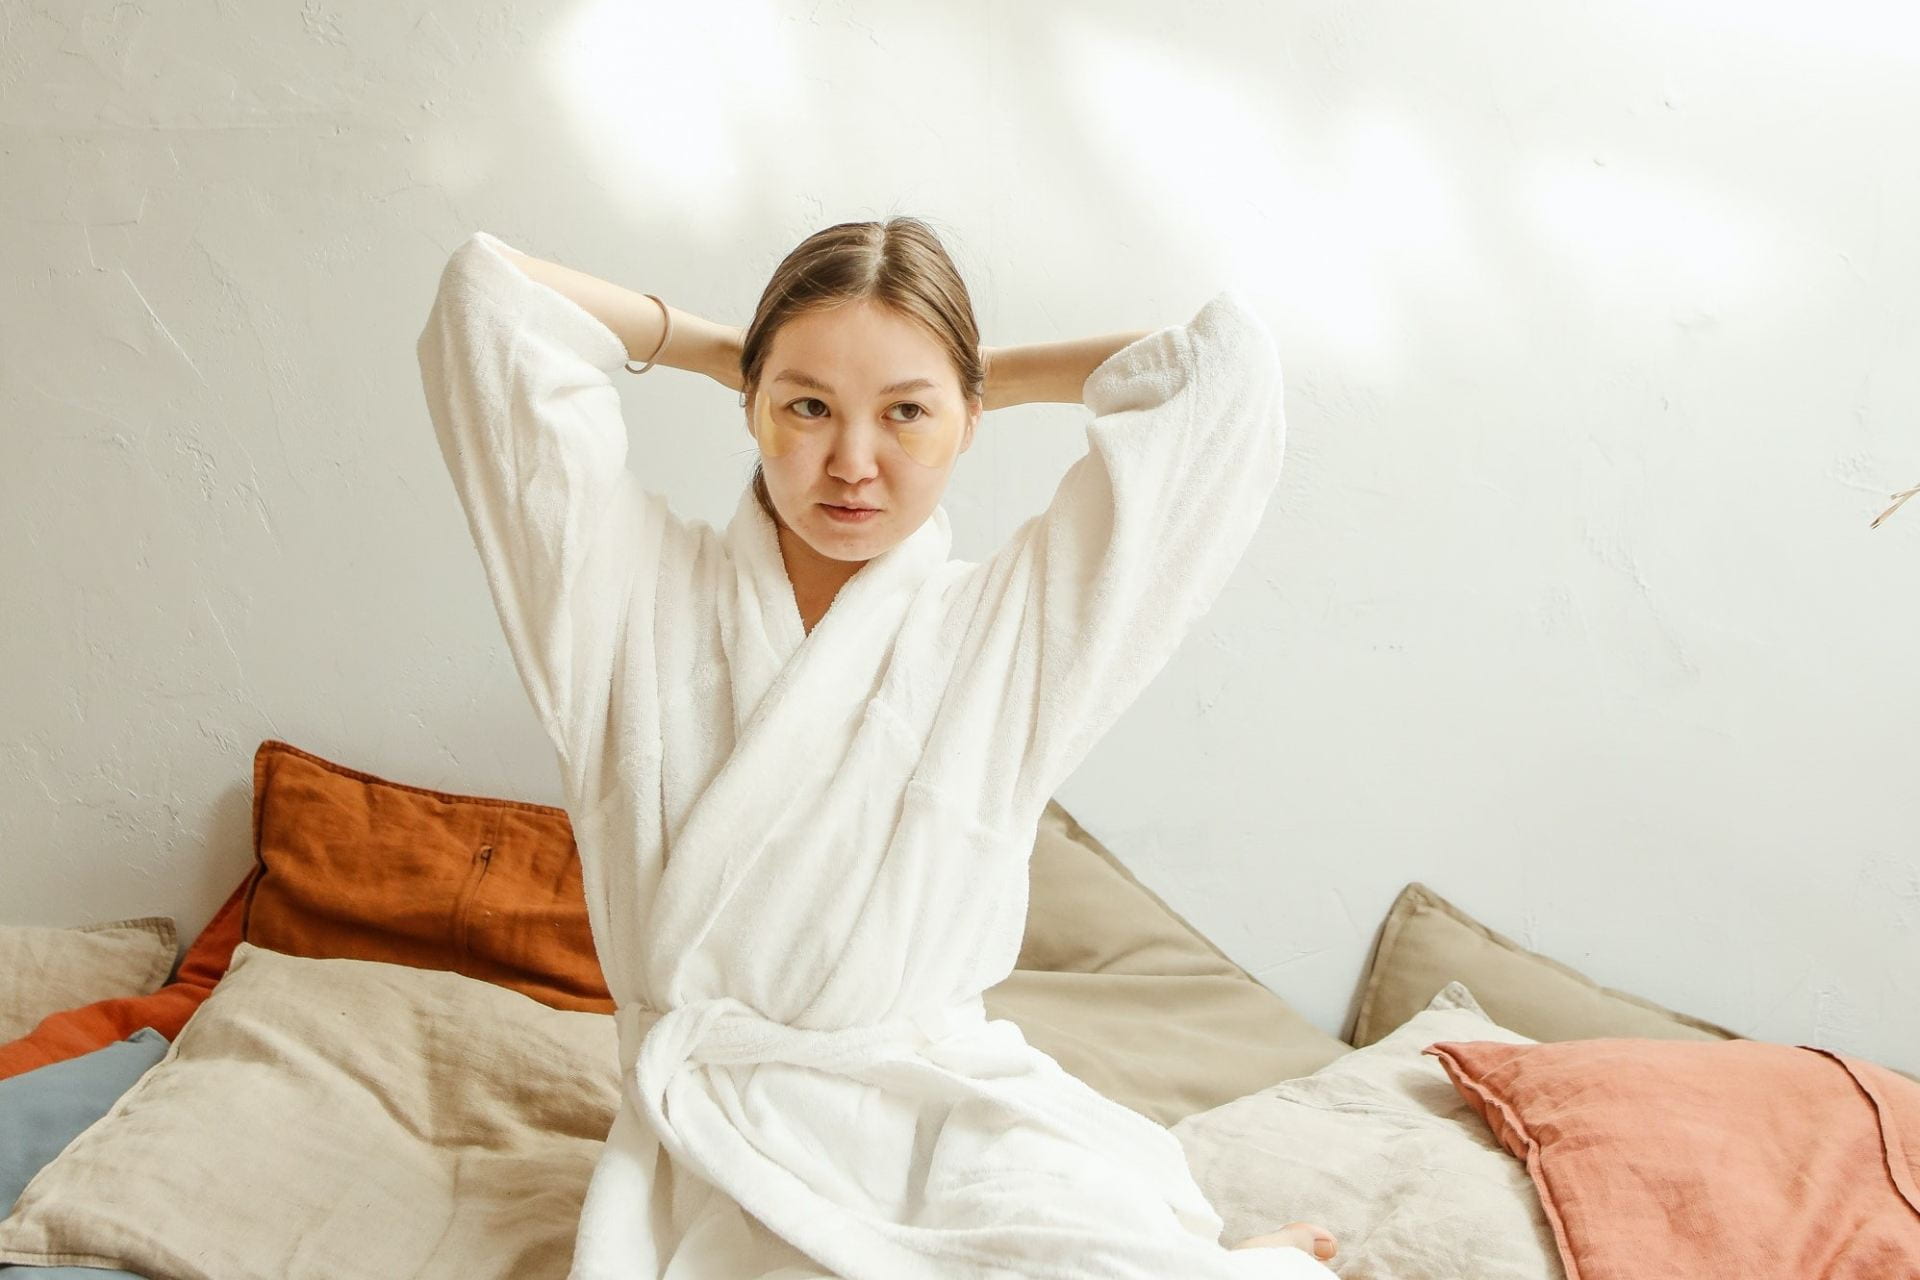 A woman sits on a bed in a robe while doing her hair.